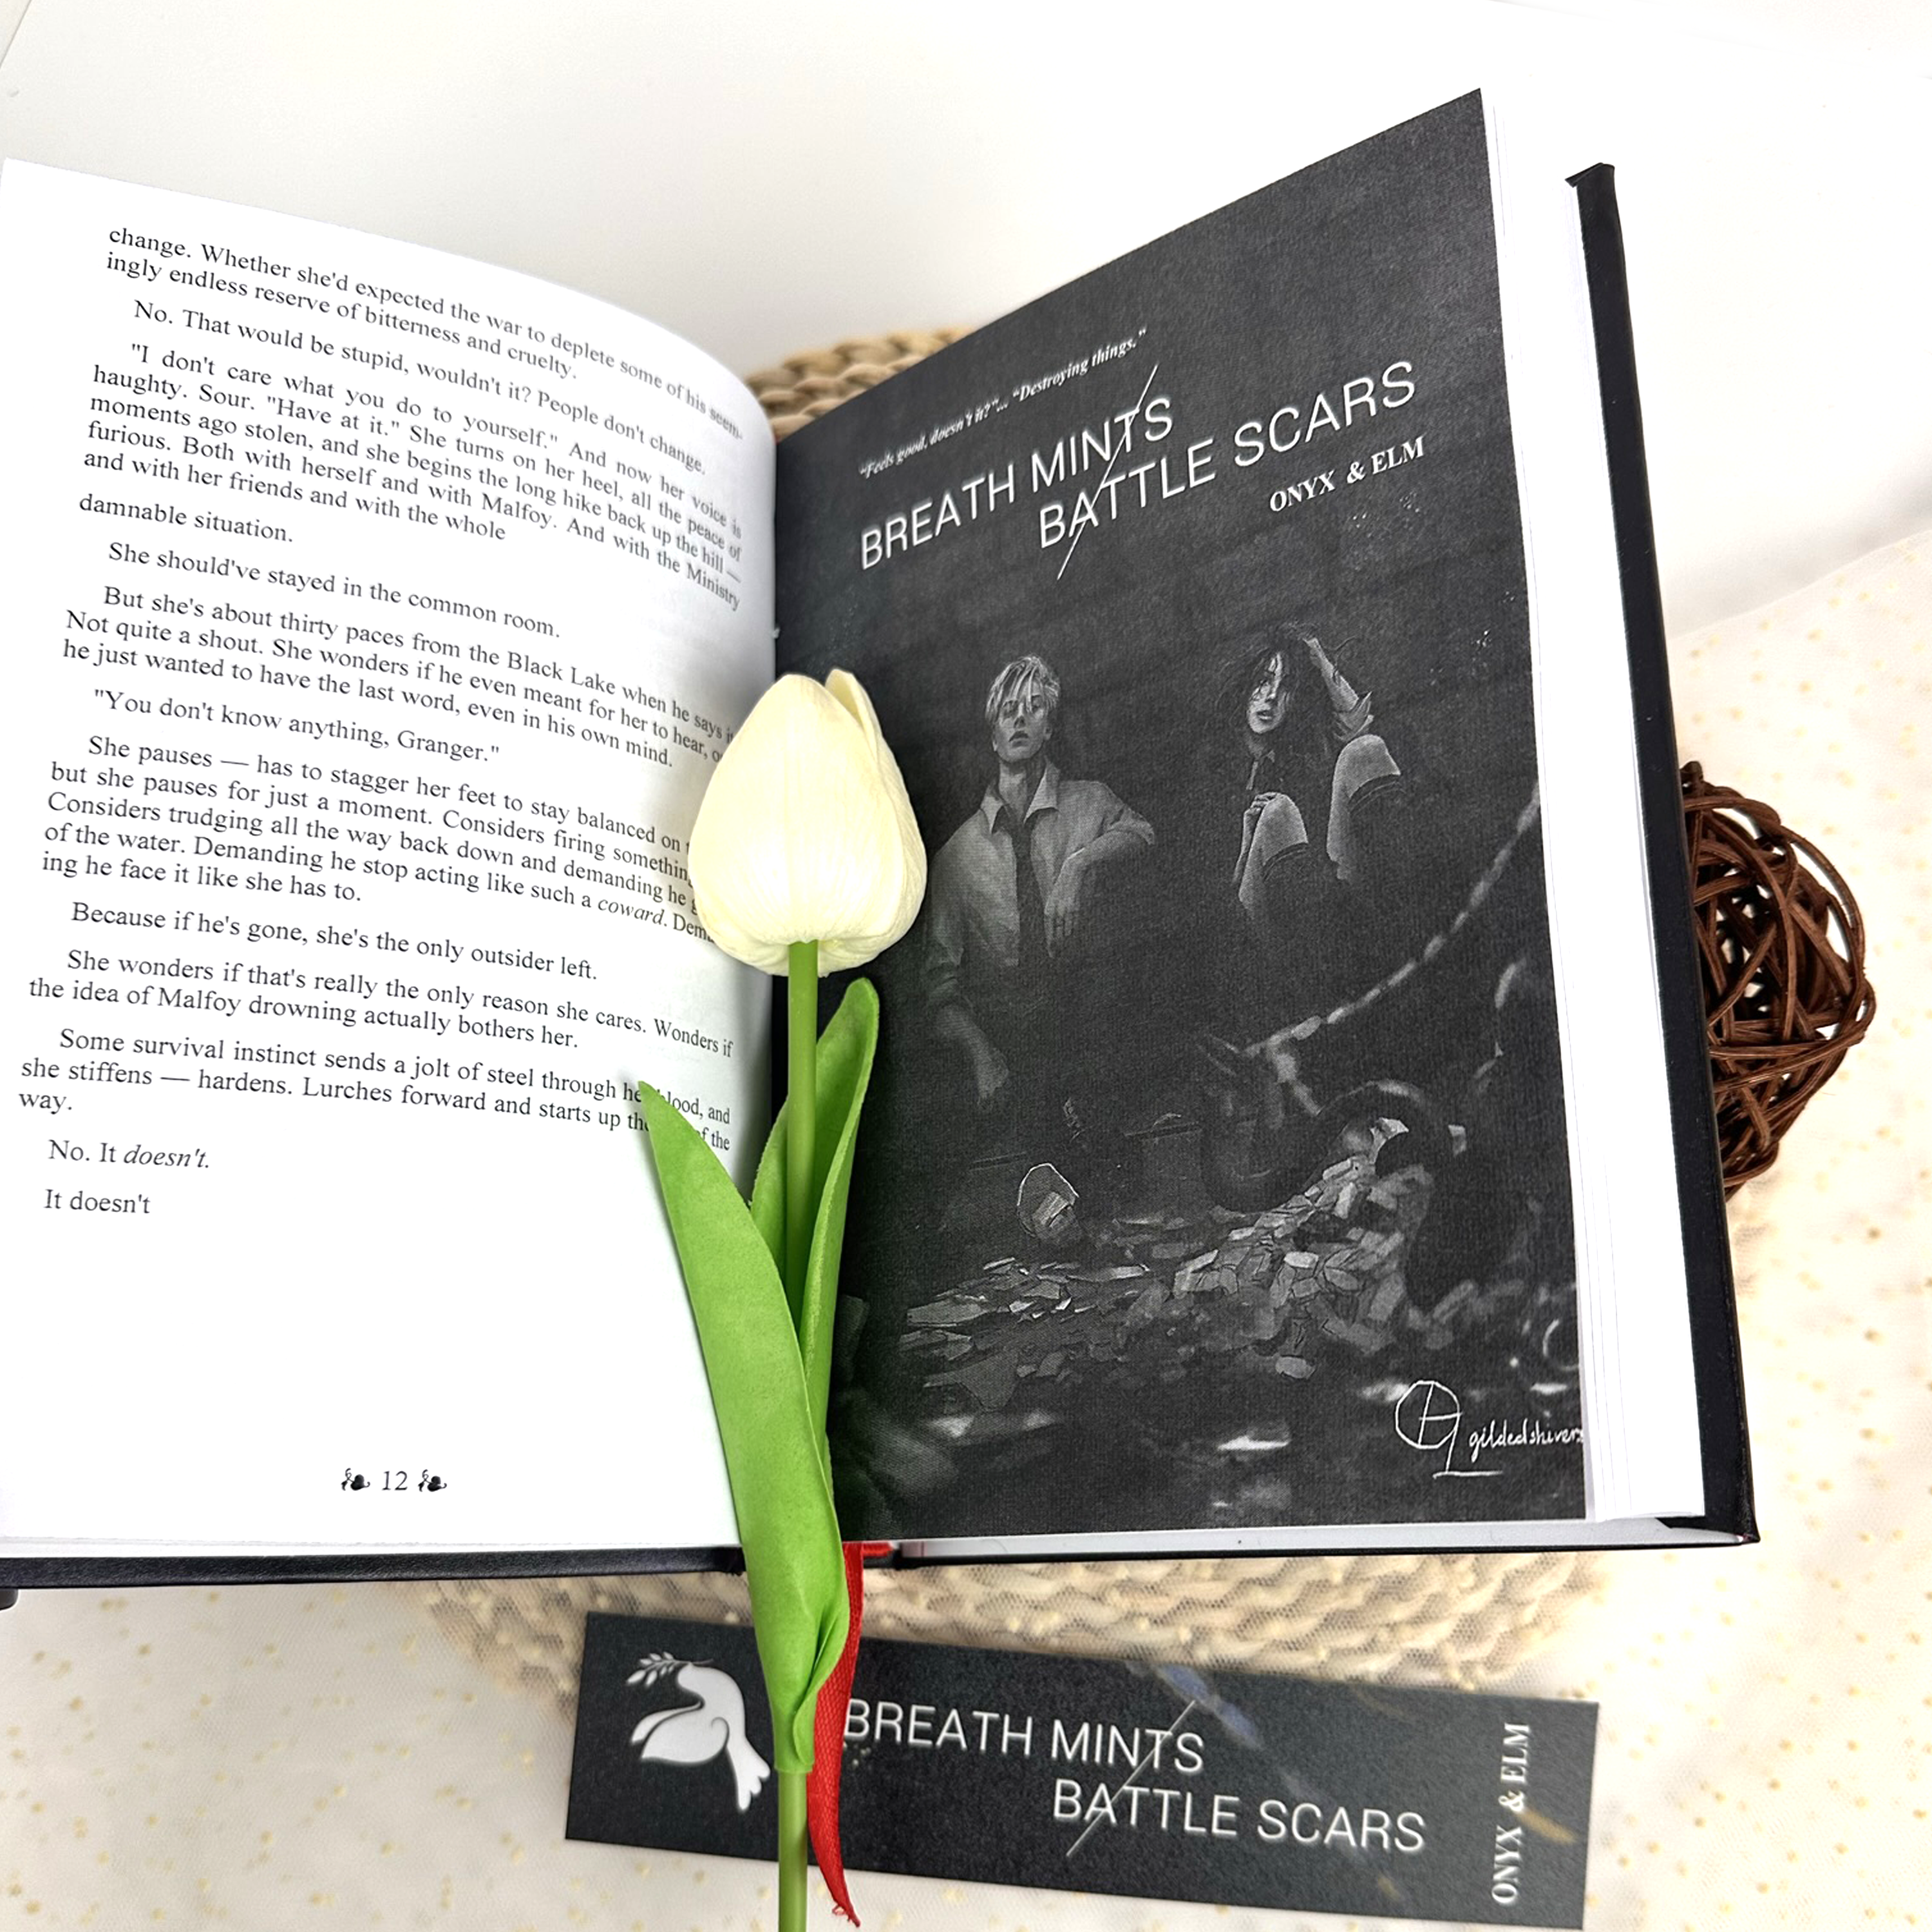 Breath Mints / Battle Scars Books, Deluxe Edition with Illustrations - Complete Series. Exclusive bookmark included